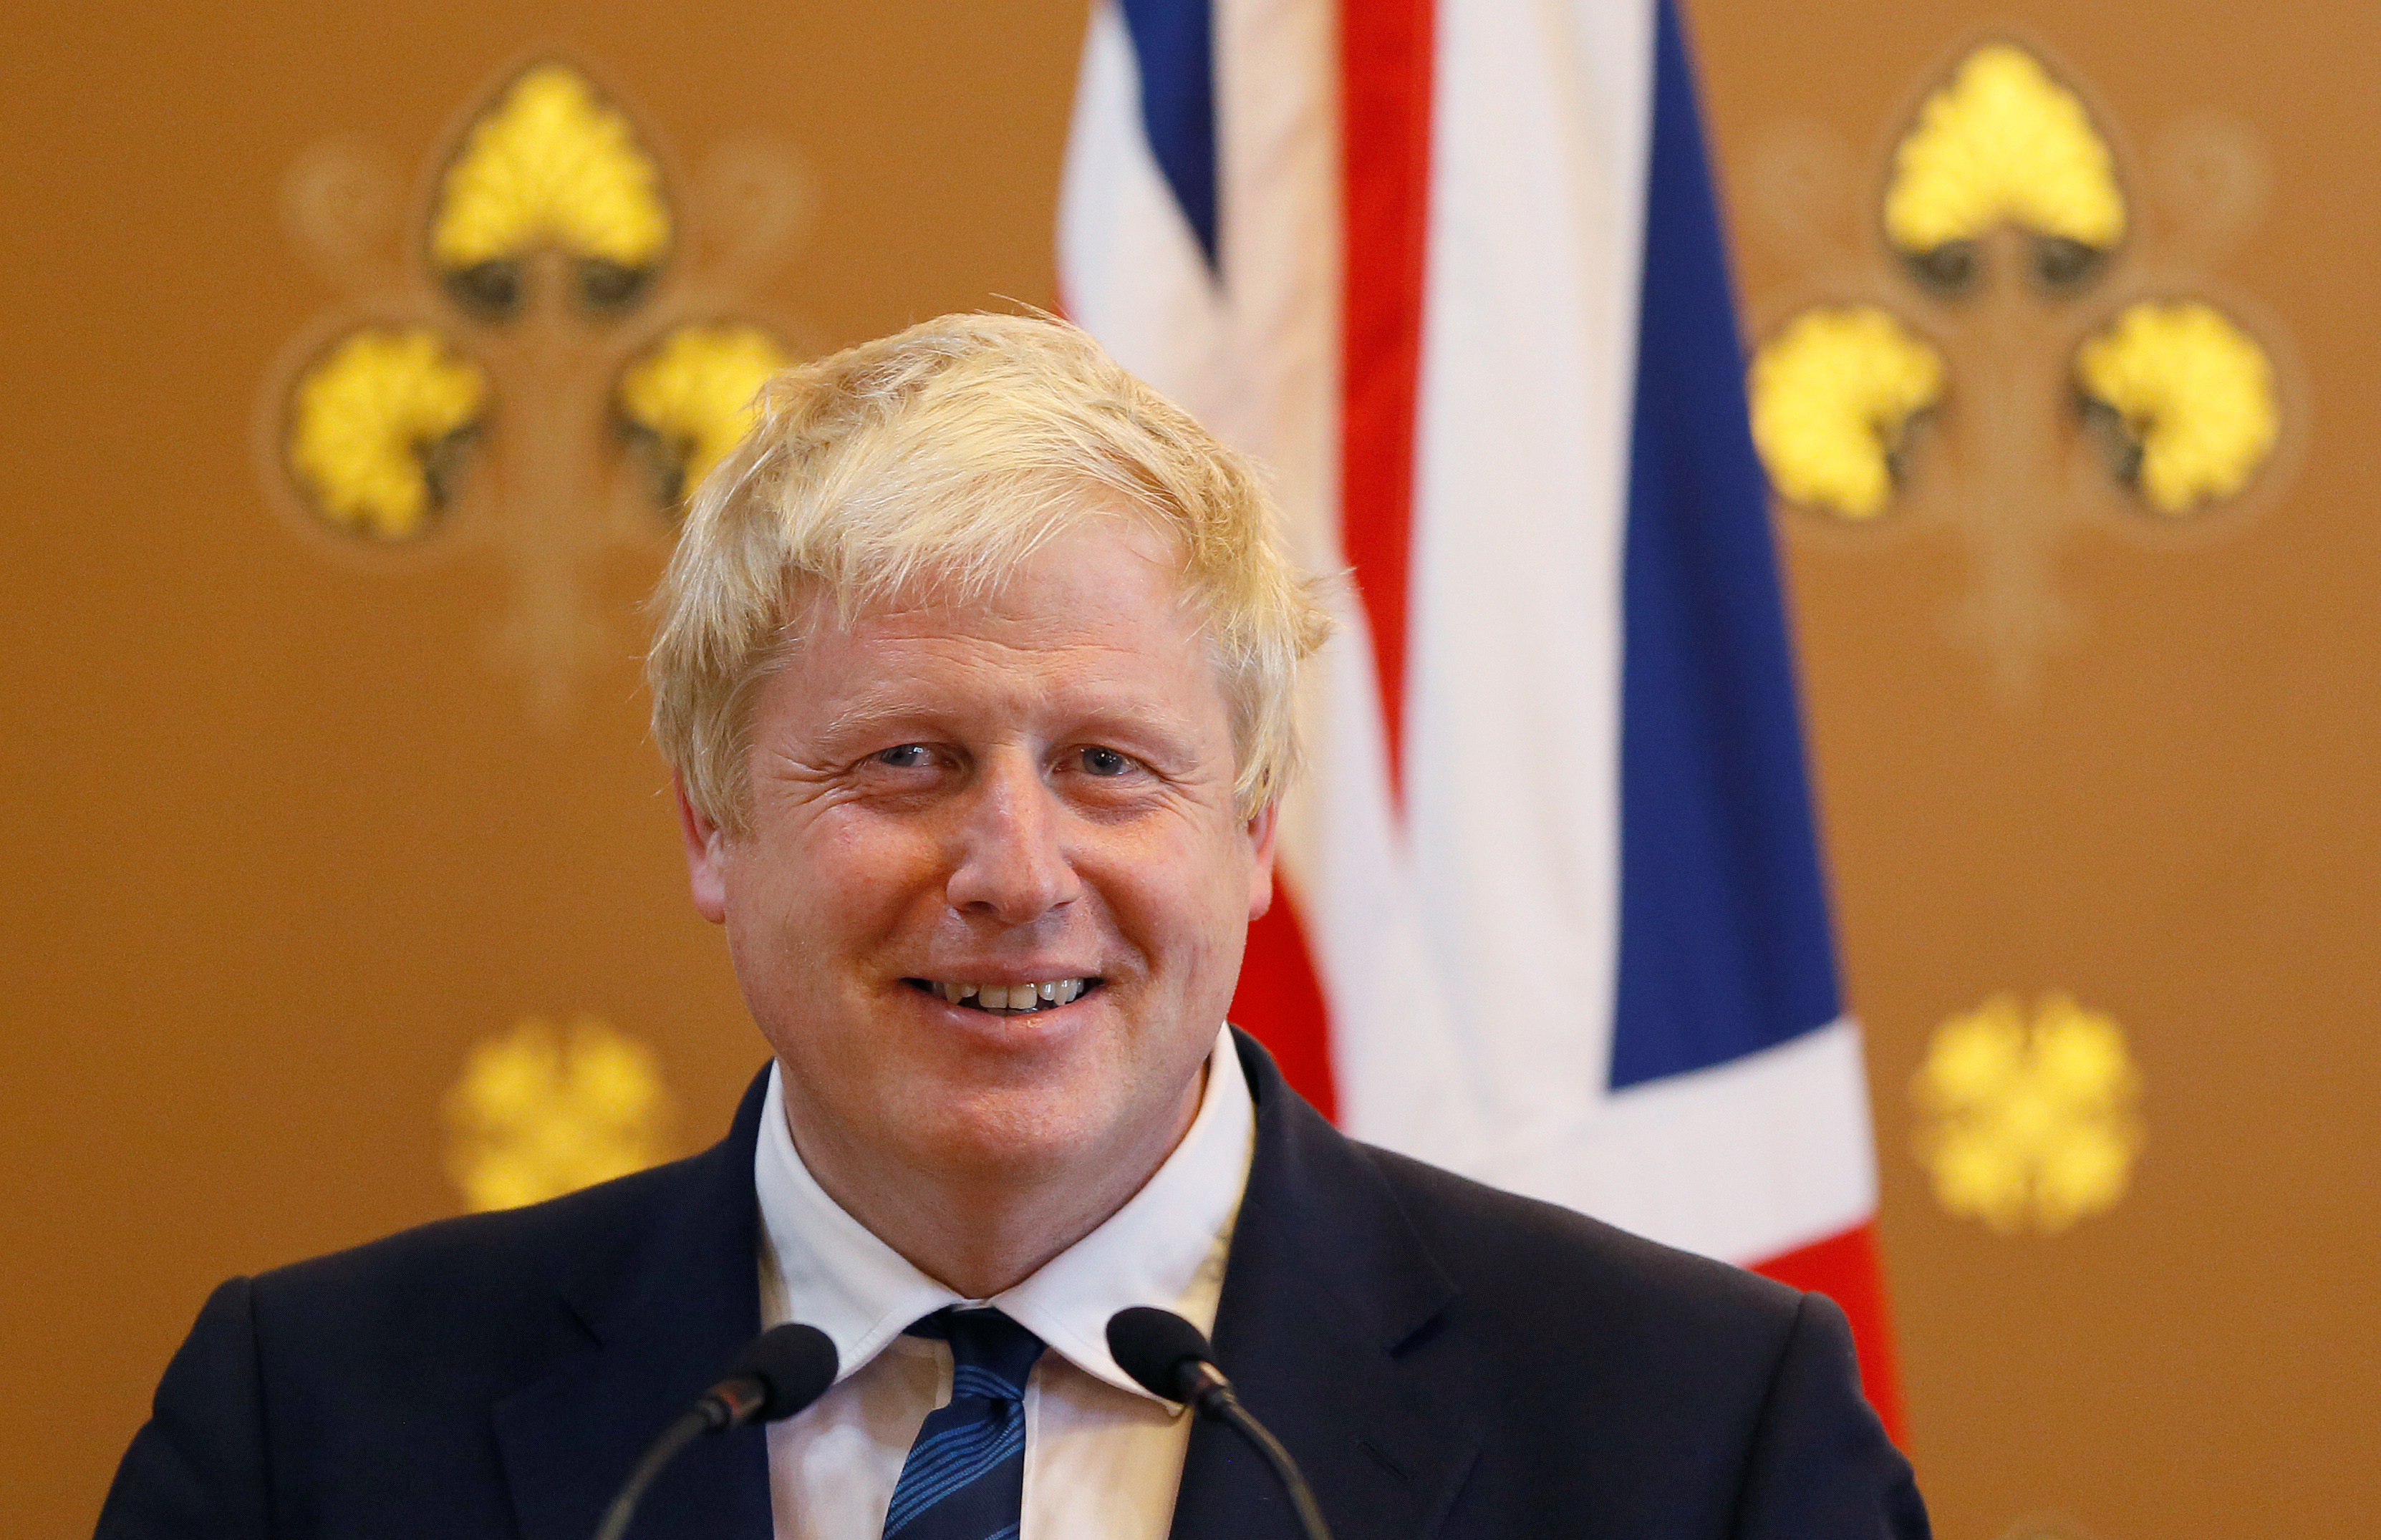 Britain's Foreign Secretary Boris Johnson smiles during a press conference with U.S. Secretary of State John Kerry at the Foreign Office in London